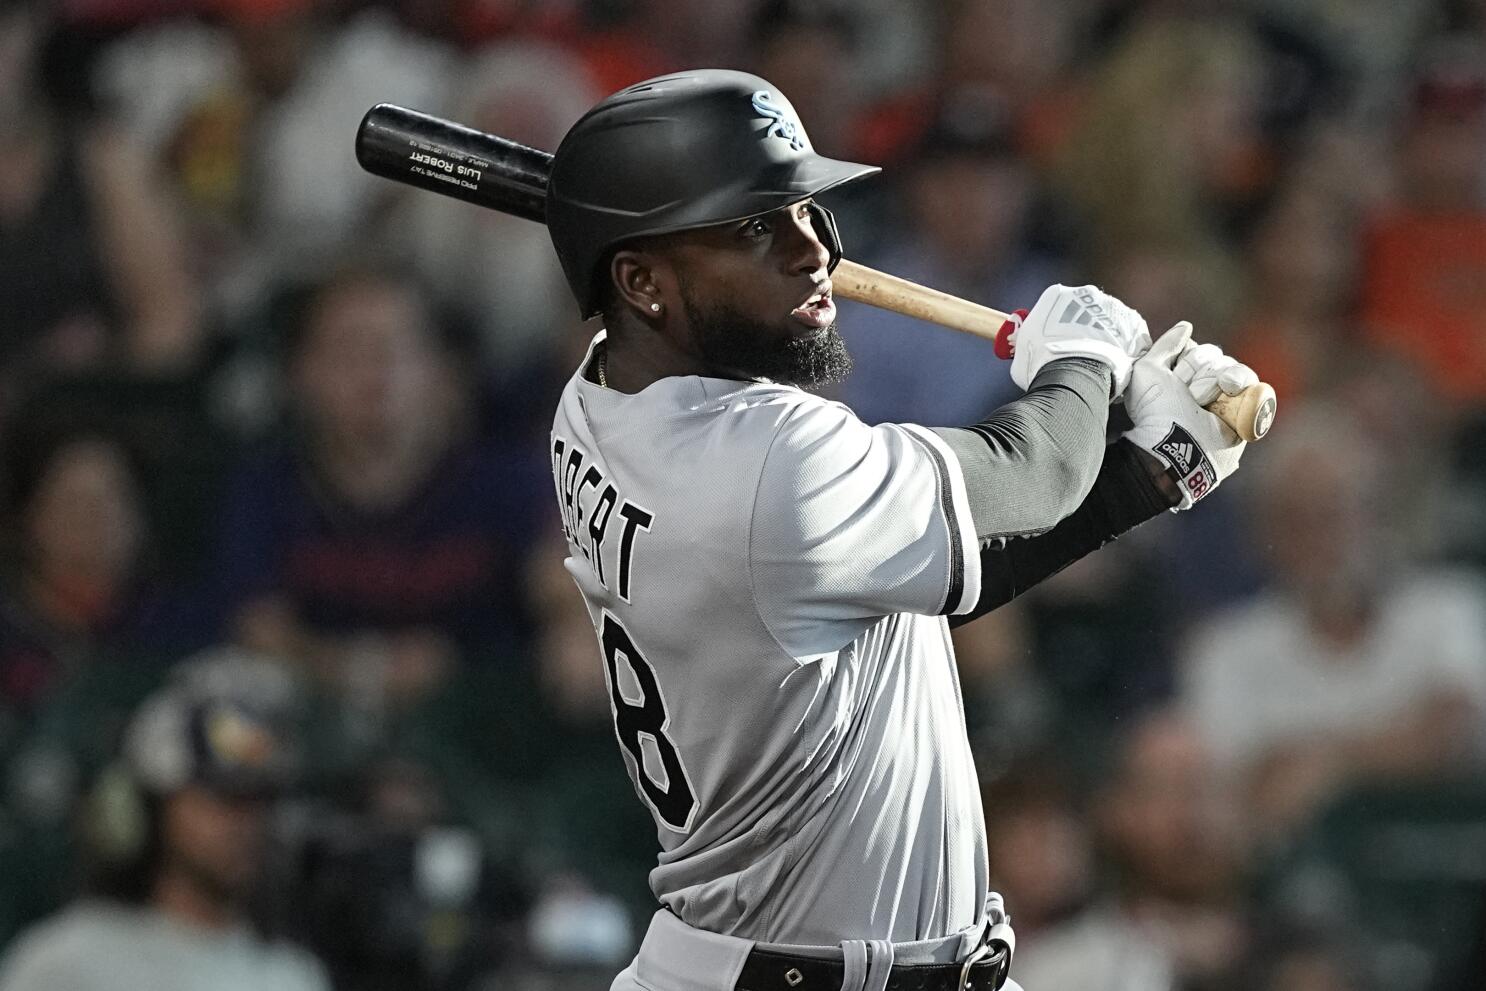 White Sox: Players Weekend jerseys do not disappoint